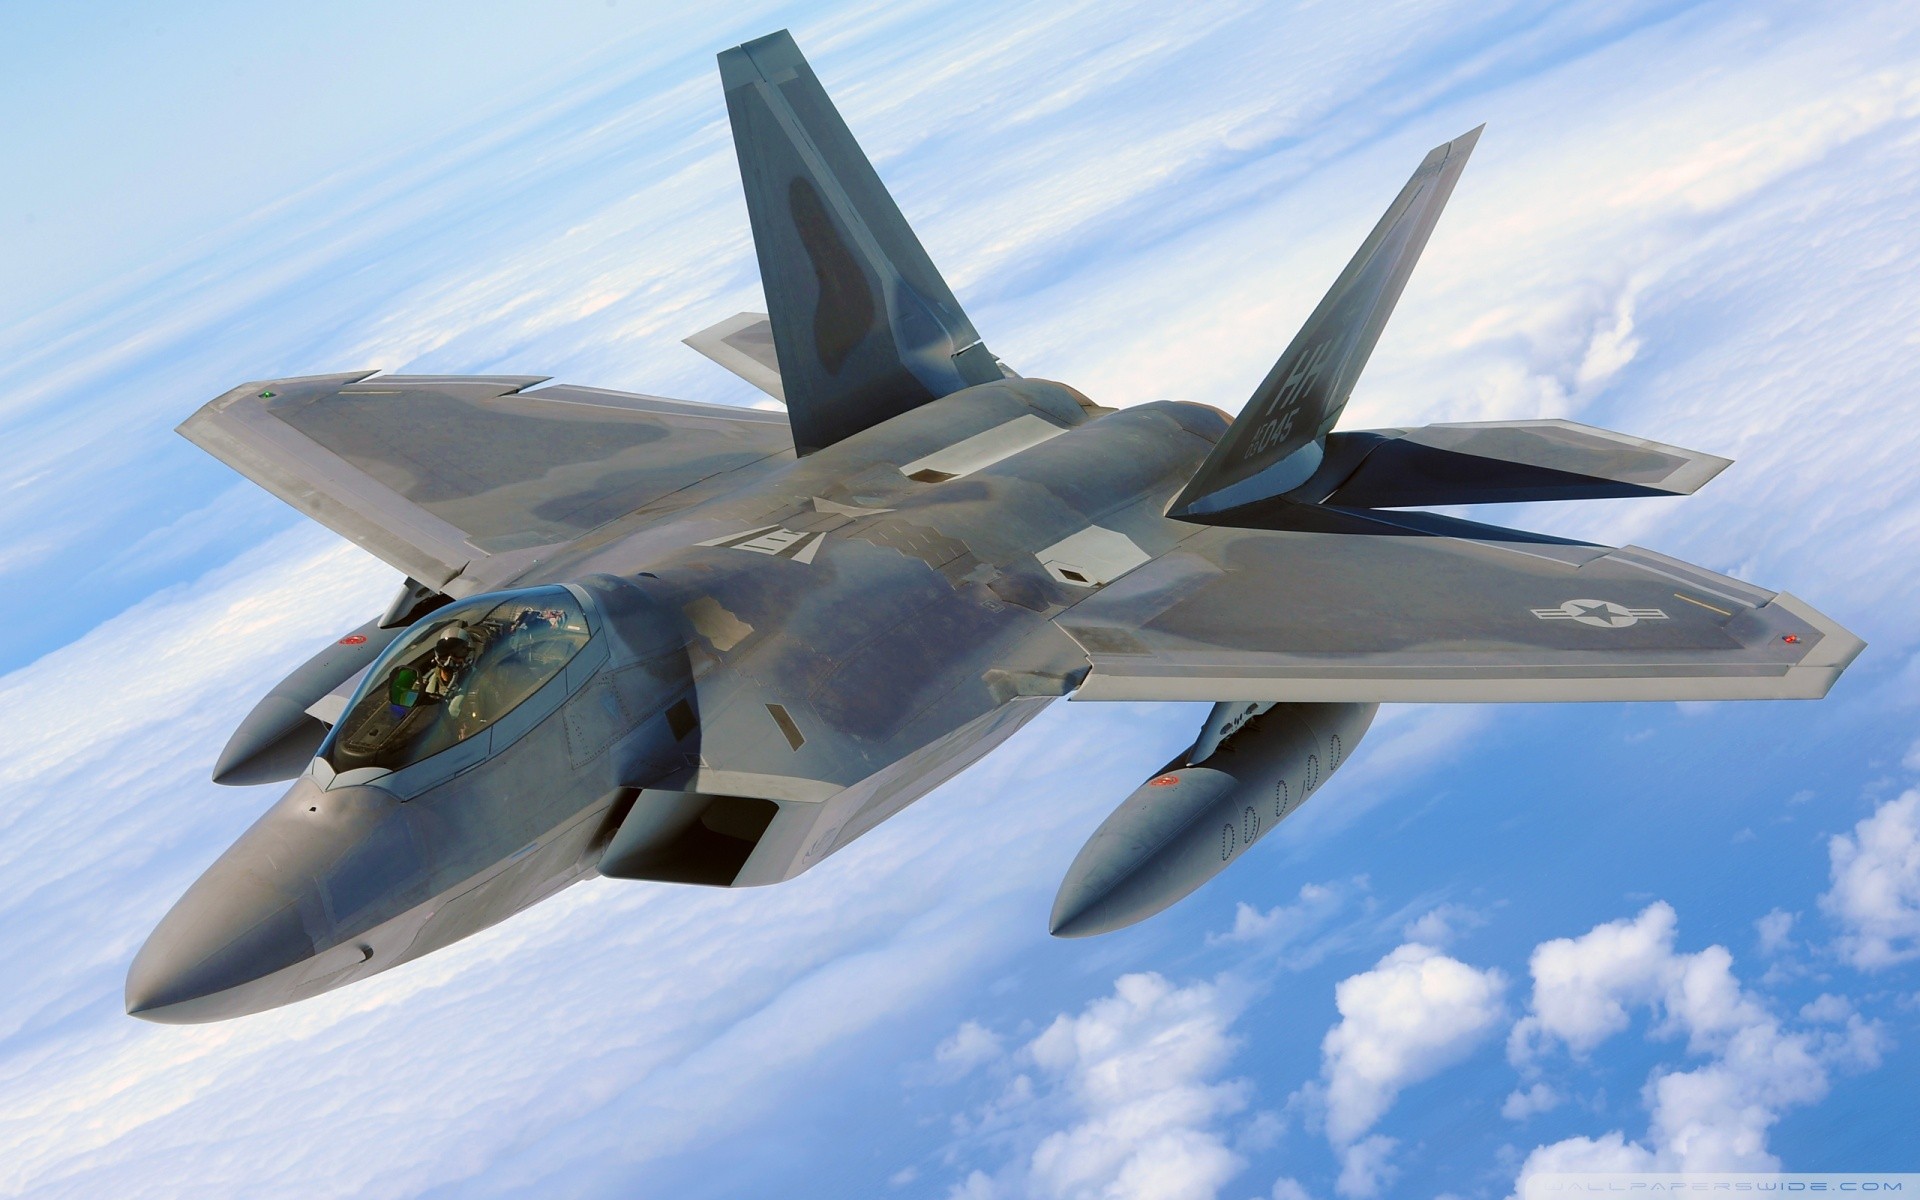 General 1920x1200 military aircraft military vehicle aircraft military vehicle F-22 Raptor American aircraft sky clouds US Air Force flying pilot missiles